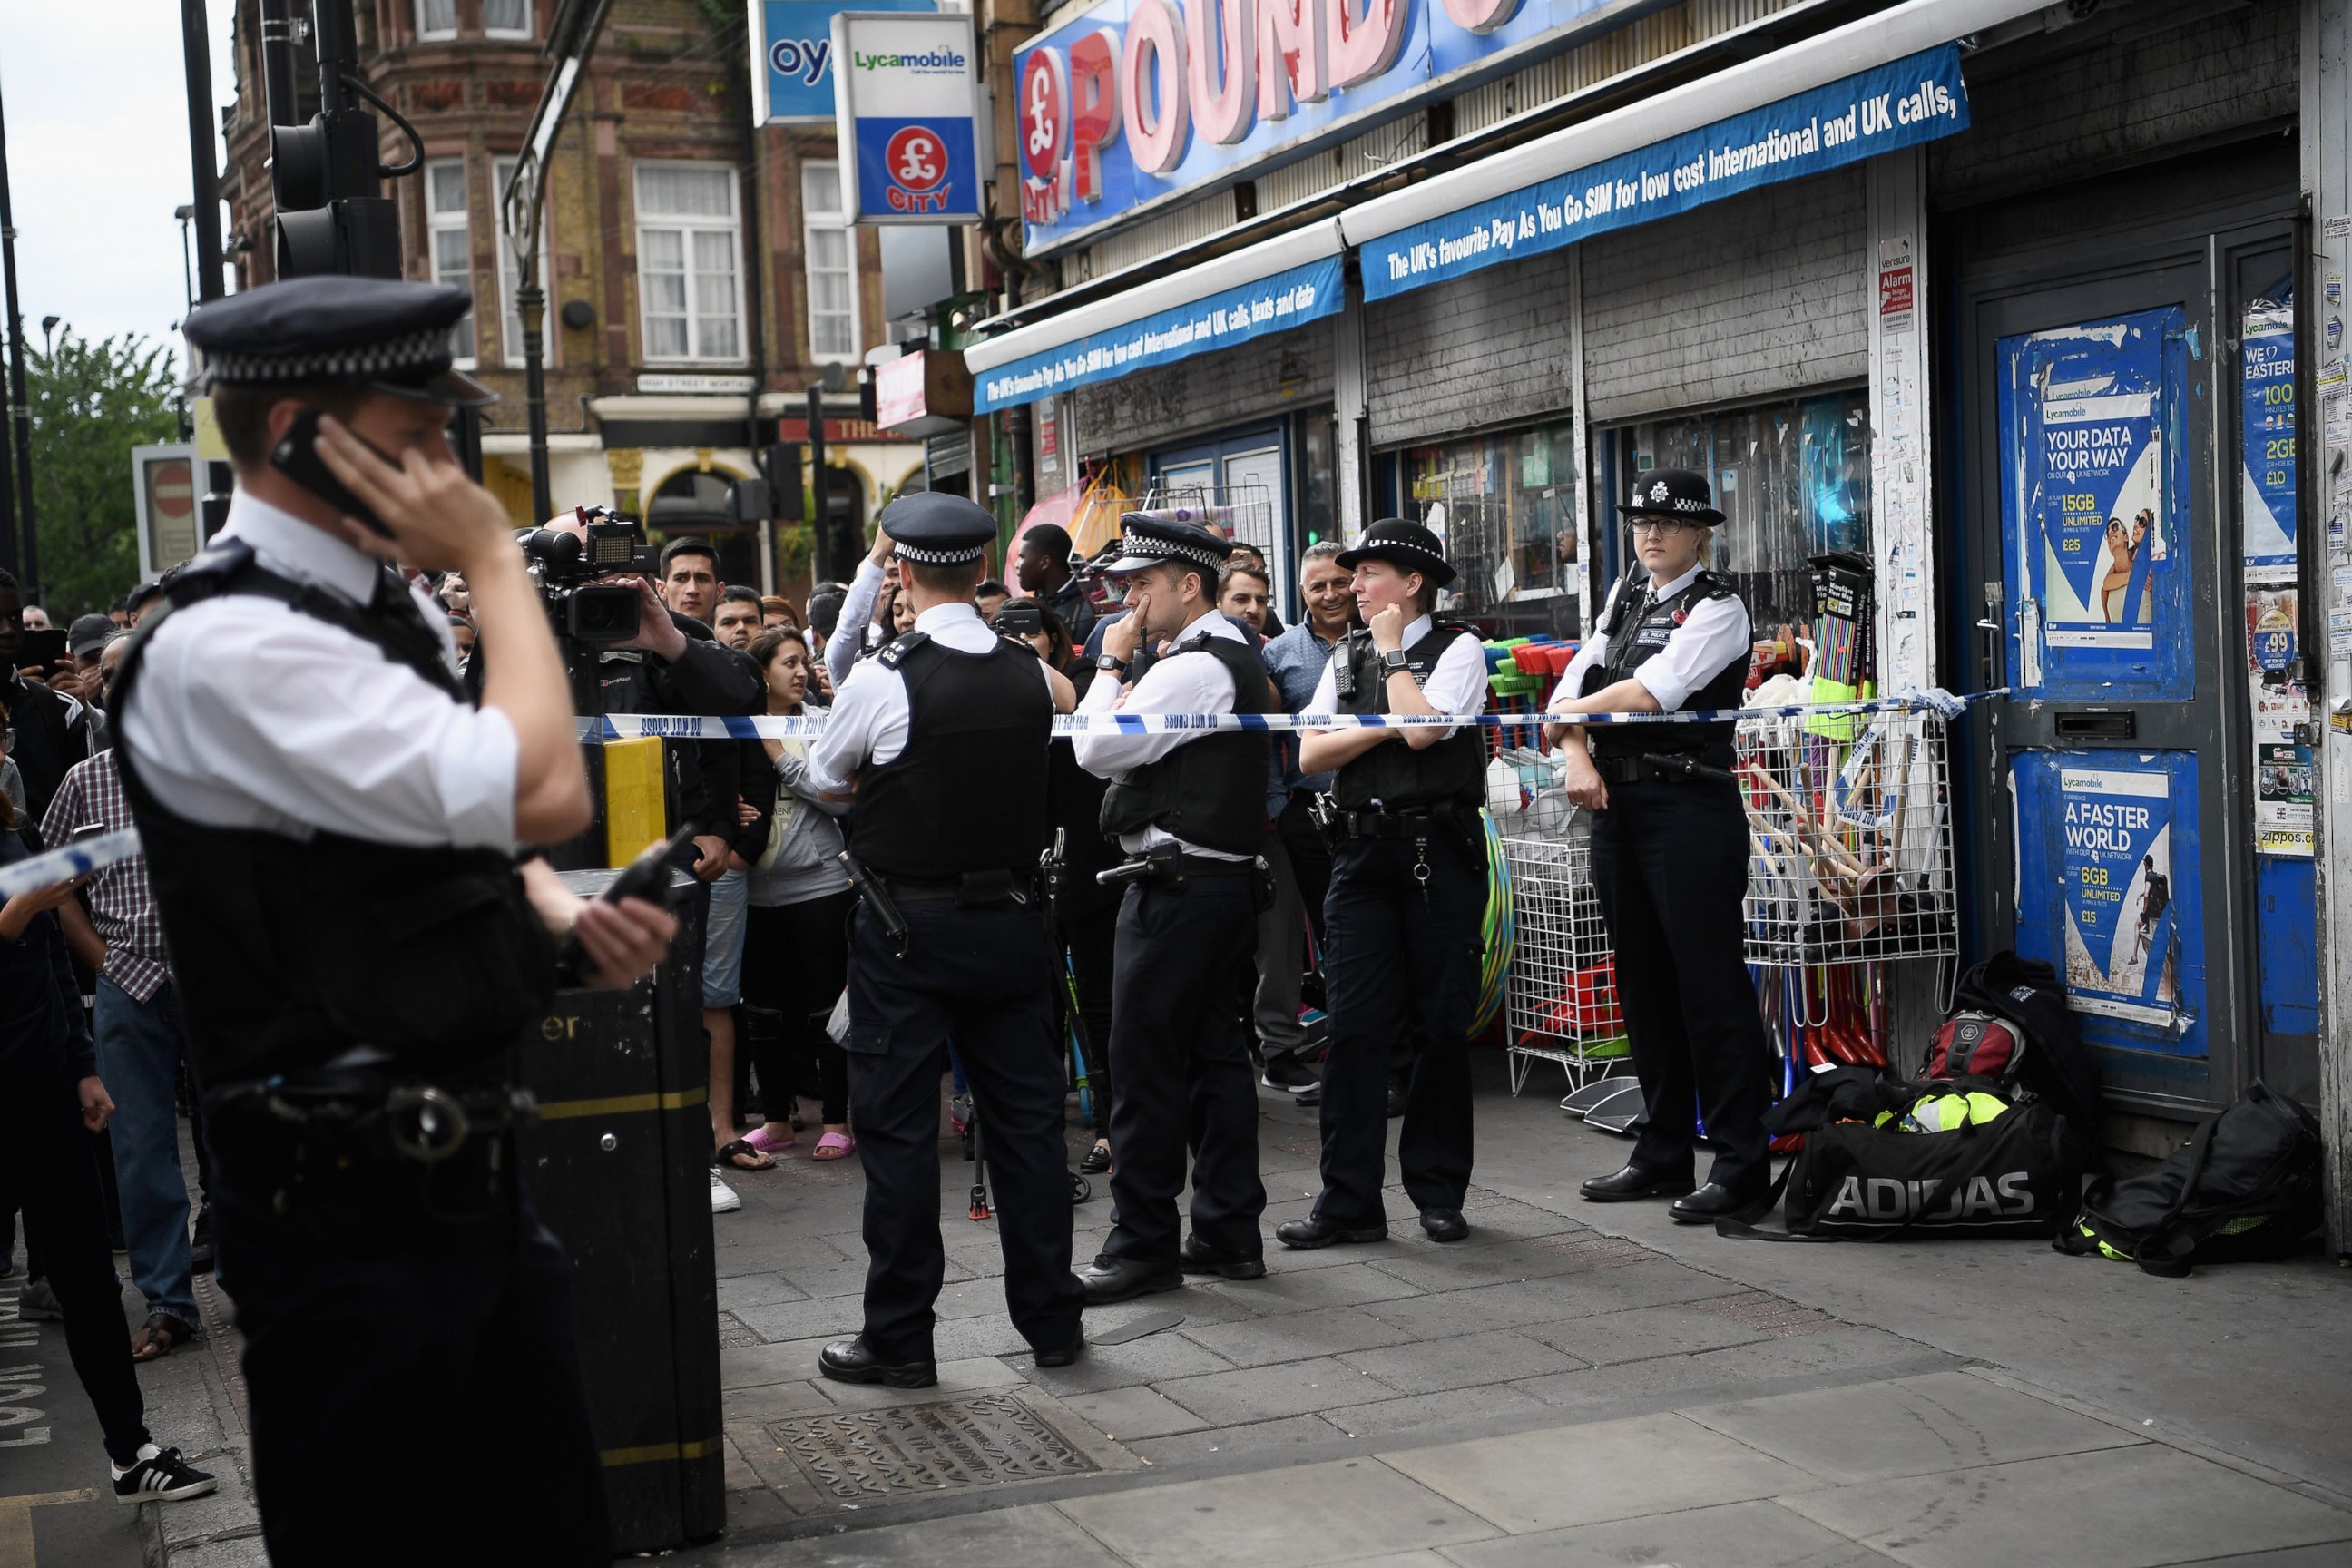 PHOTO: Police officers stand outside a property in East Ham which has been raided by police, June 4, 2017 in London, England. 